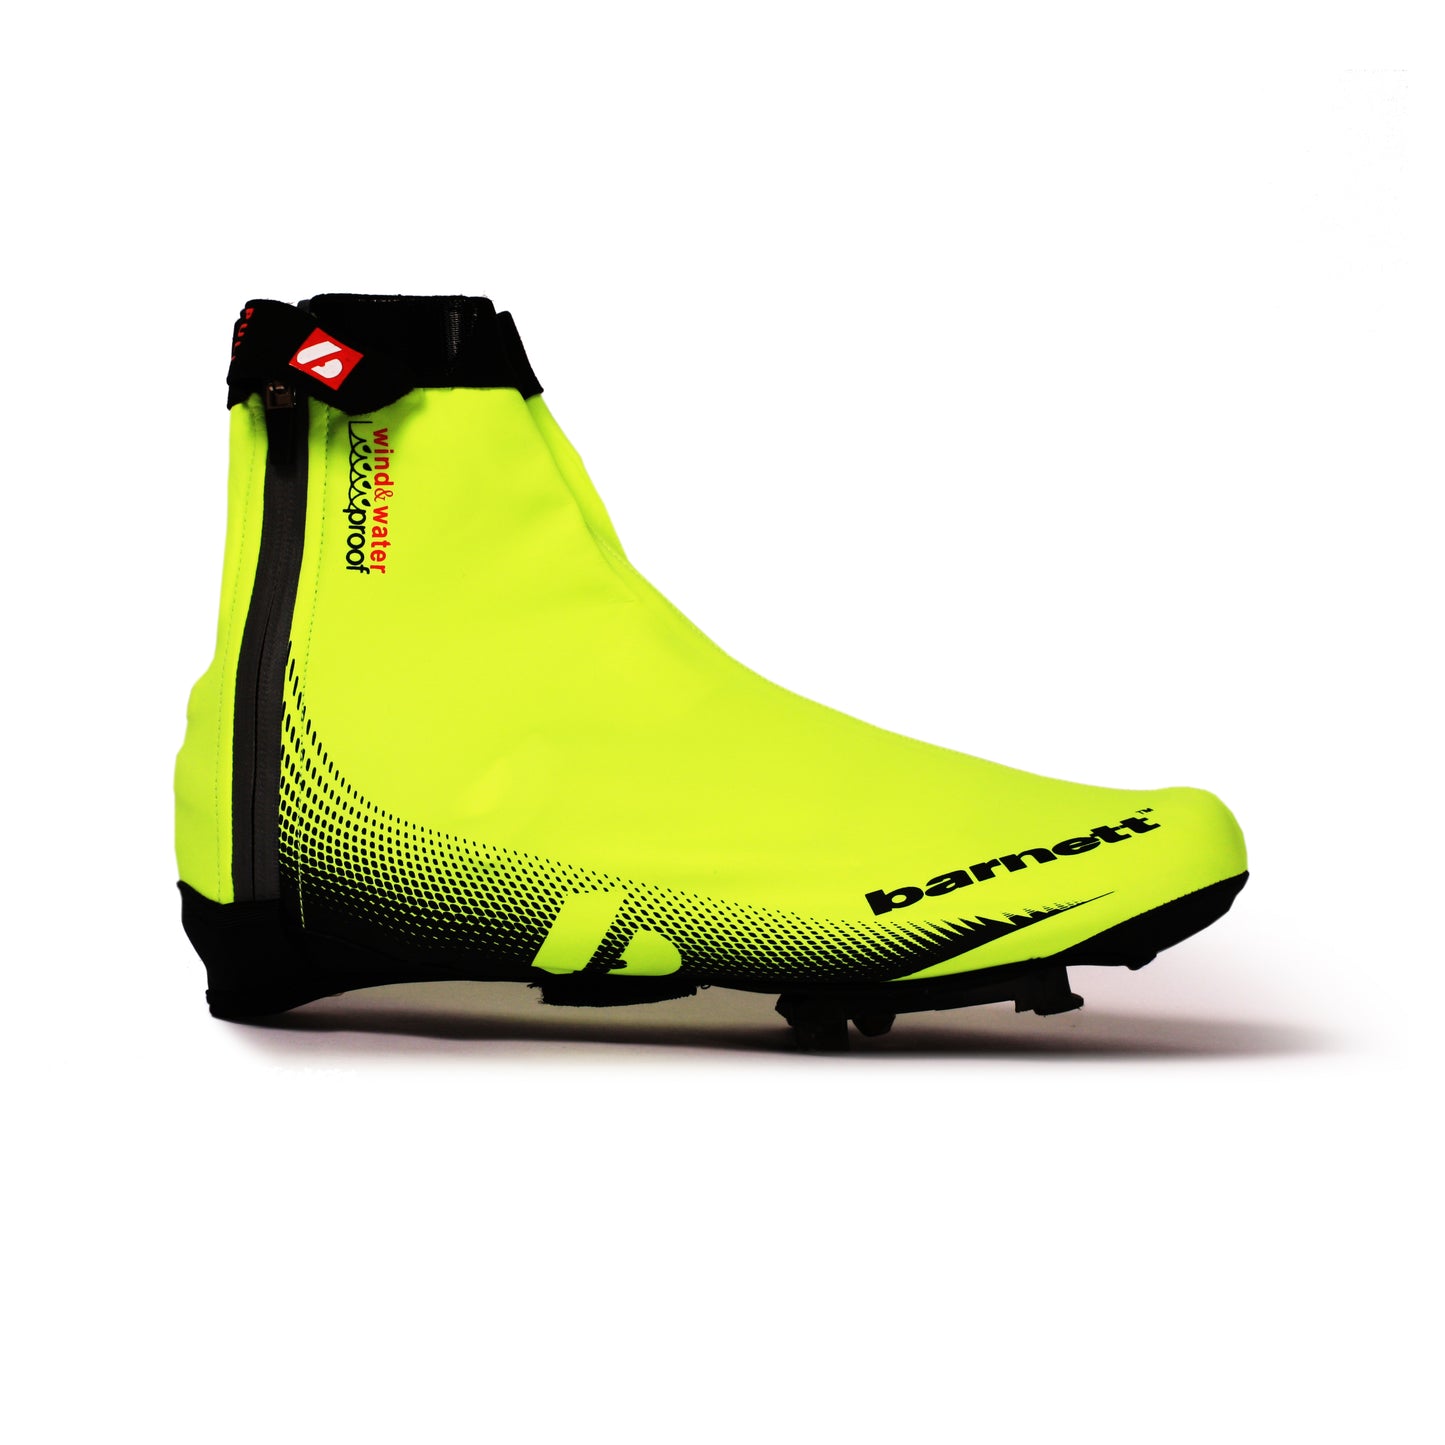 BSP-05 Cycling overshoes, Warm and water-repellent